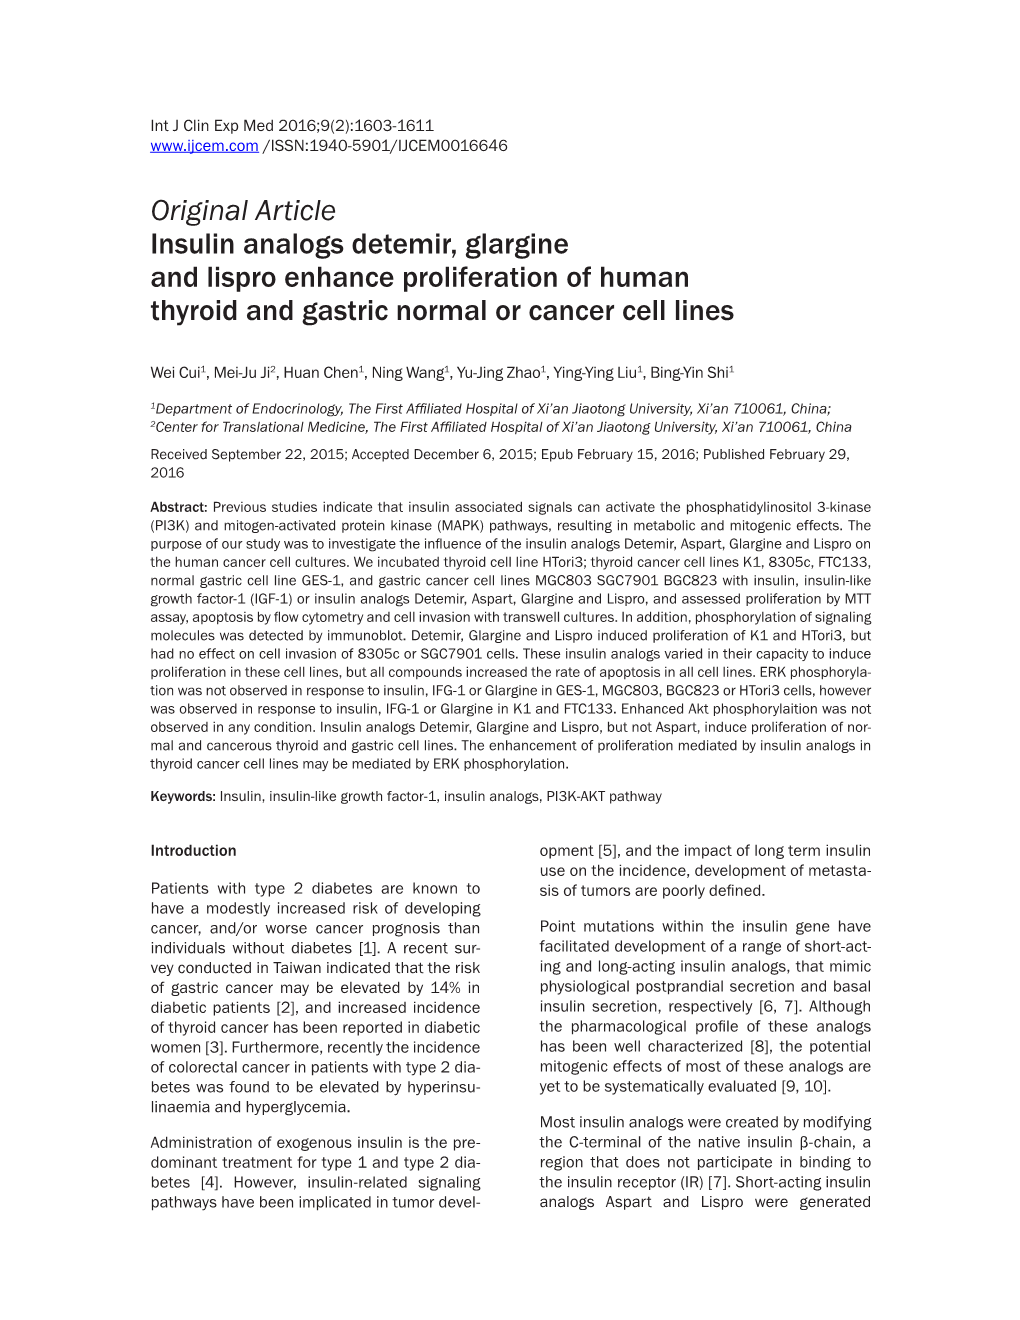 Original Article Insulin Analogs Detemir, Glargine and Lispro Enhance Proliferation of Human Thyroid and Gastric Normal Or Cancer Cell Lines